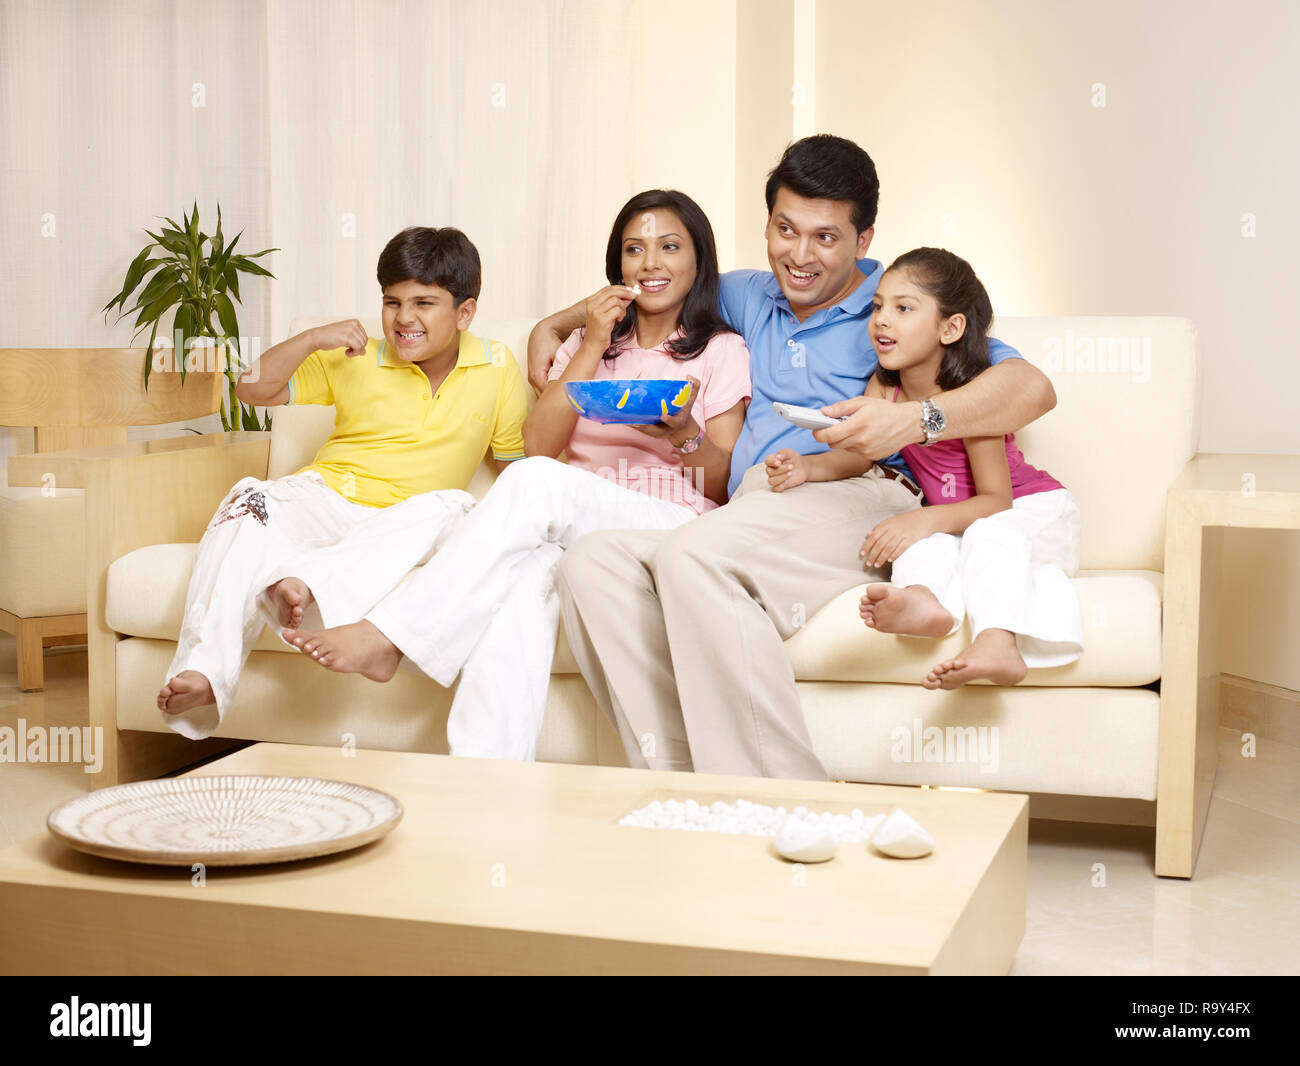 PORTRAIT OF FAMILY OF FOUR WATCHING TV IN THEIR HOME Stock Photo